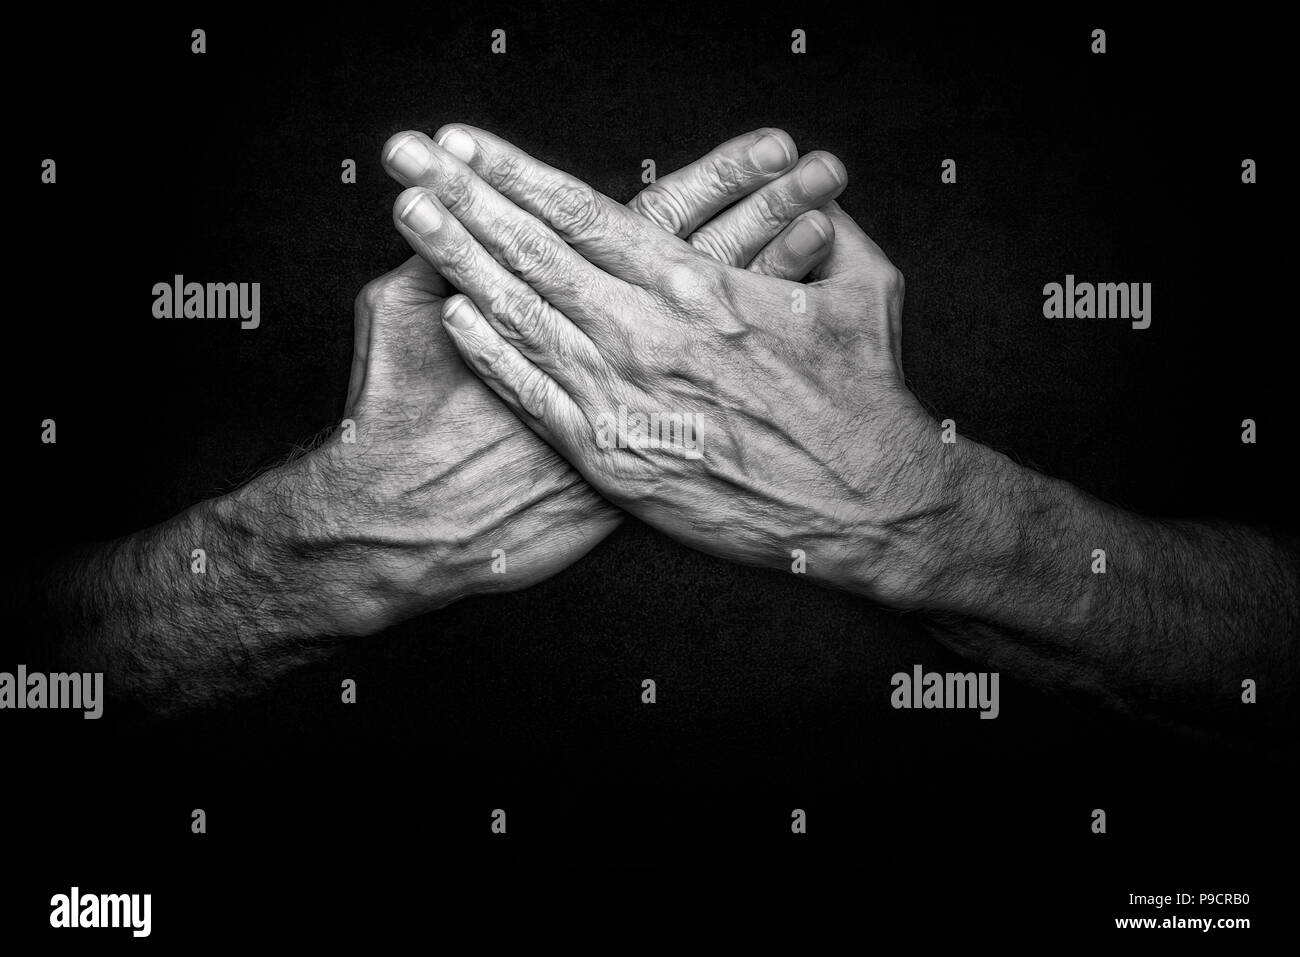 Black and White photo of crossed man's hands on dark background, symbolizing protection of security Stock Photo